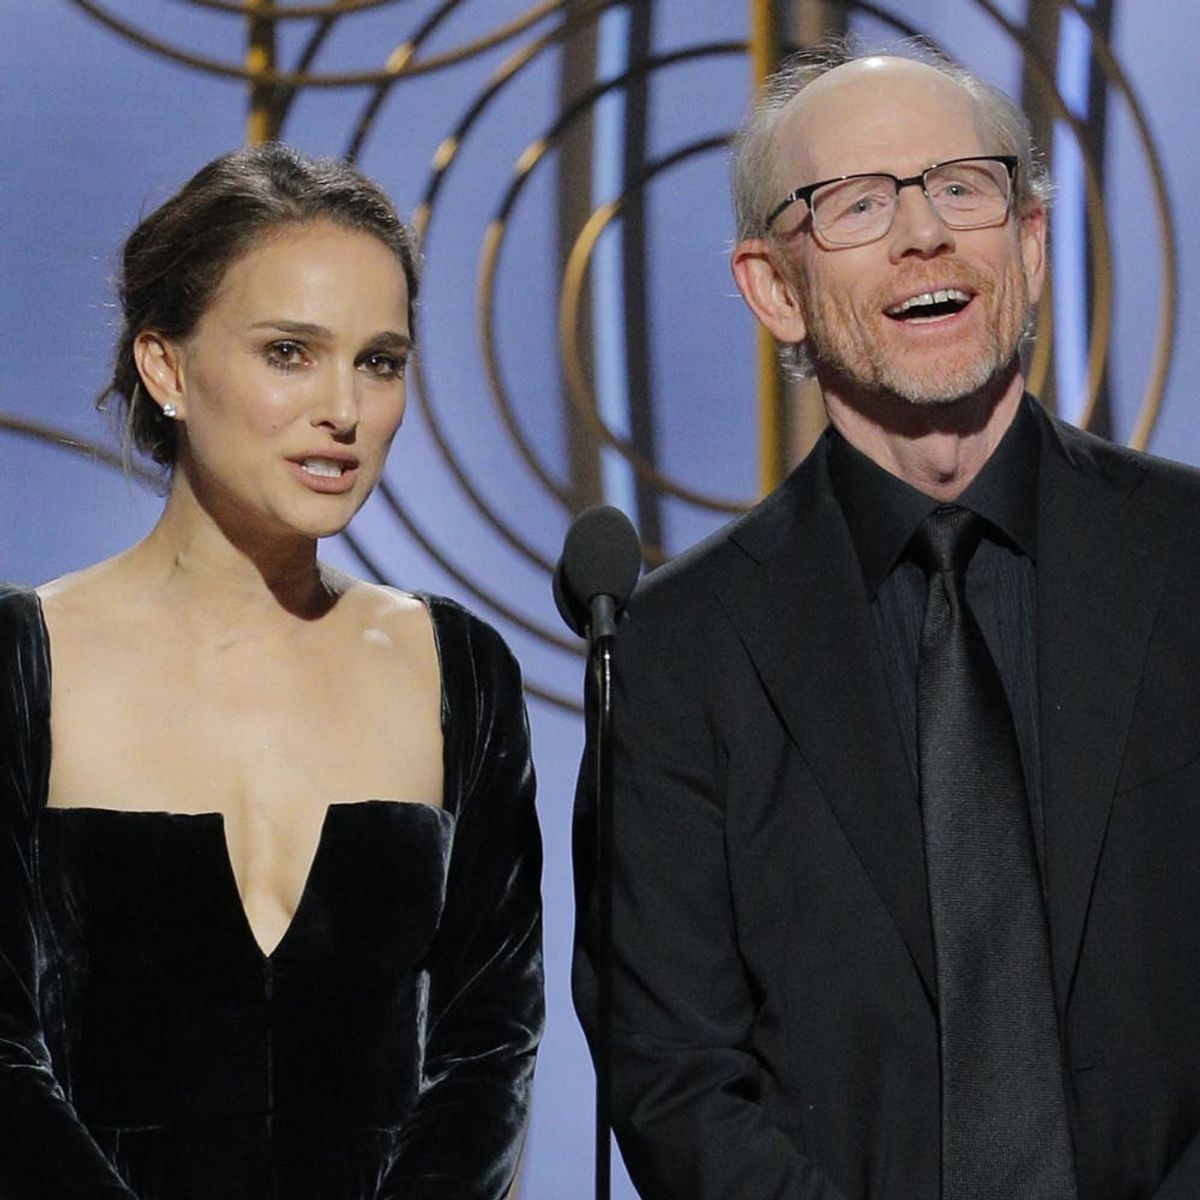 People Are Praising Natalie Portman for Calling Out the All-Male Director Nominees at the Golden Globes